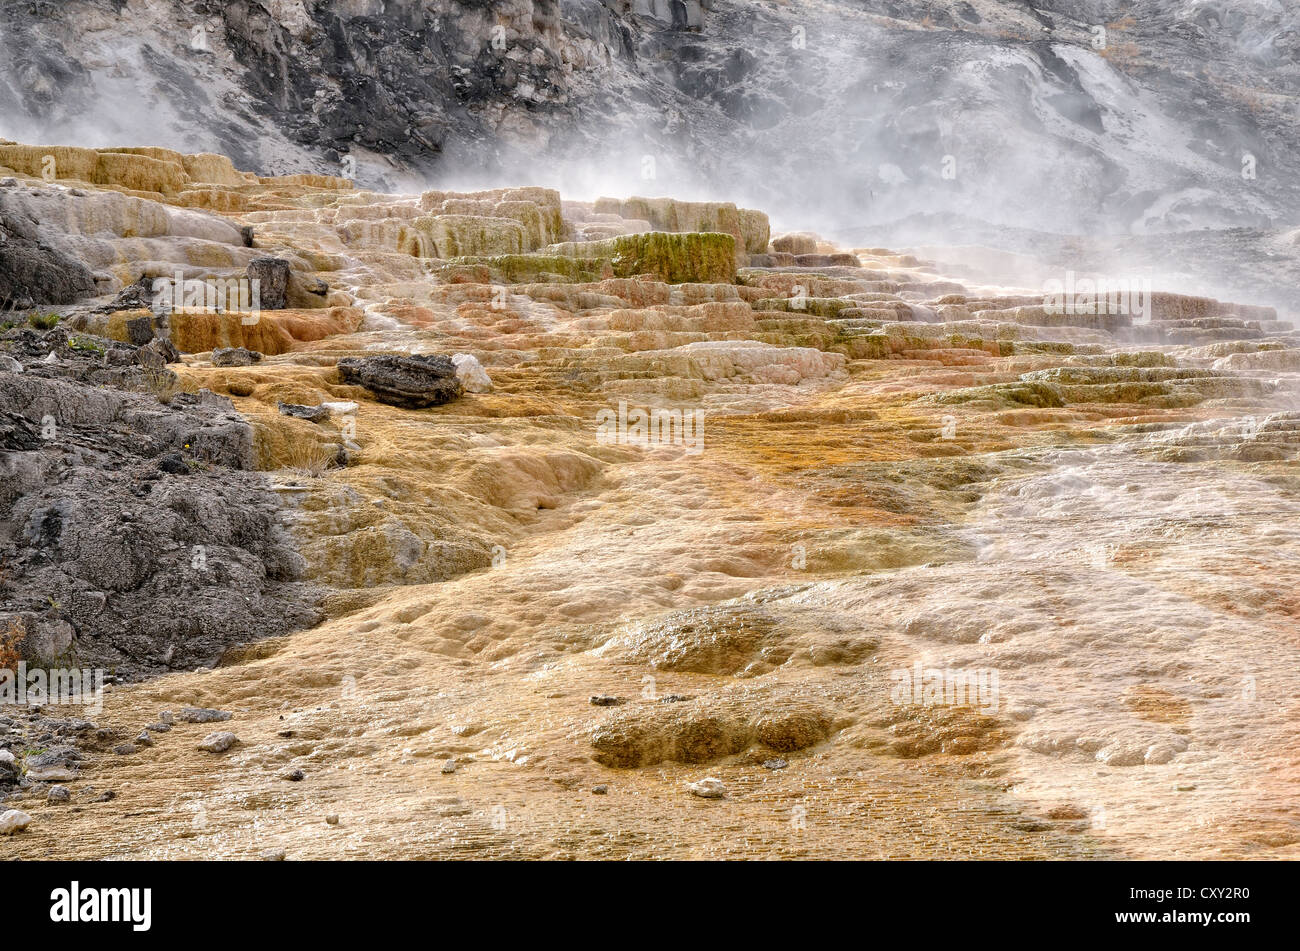 Sinter terraces, Mound Terrace, Mammoth Hot Springs, Yellowstone National Park, Wyoming, USA Stock Photo